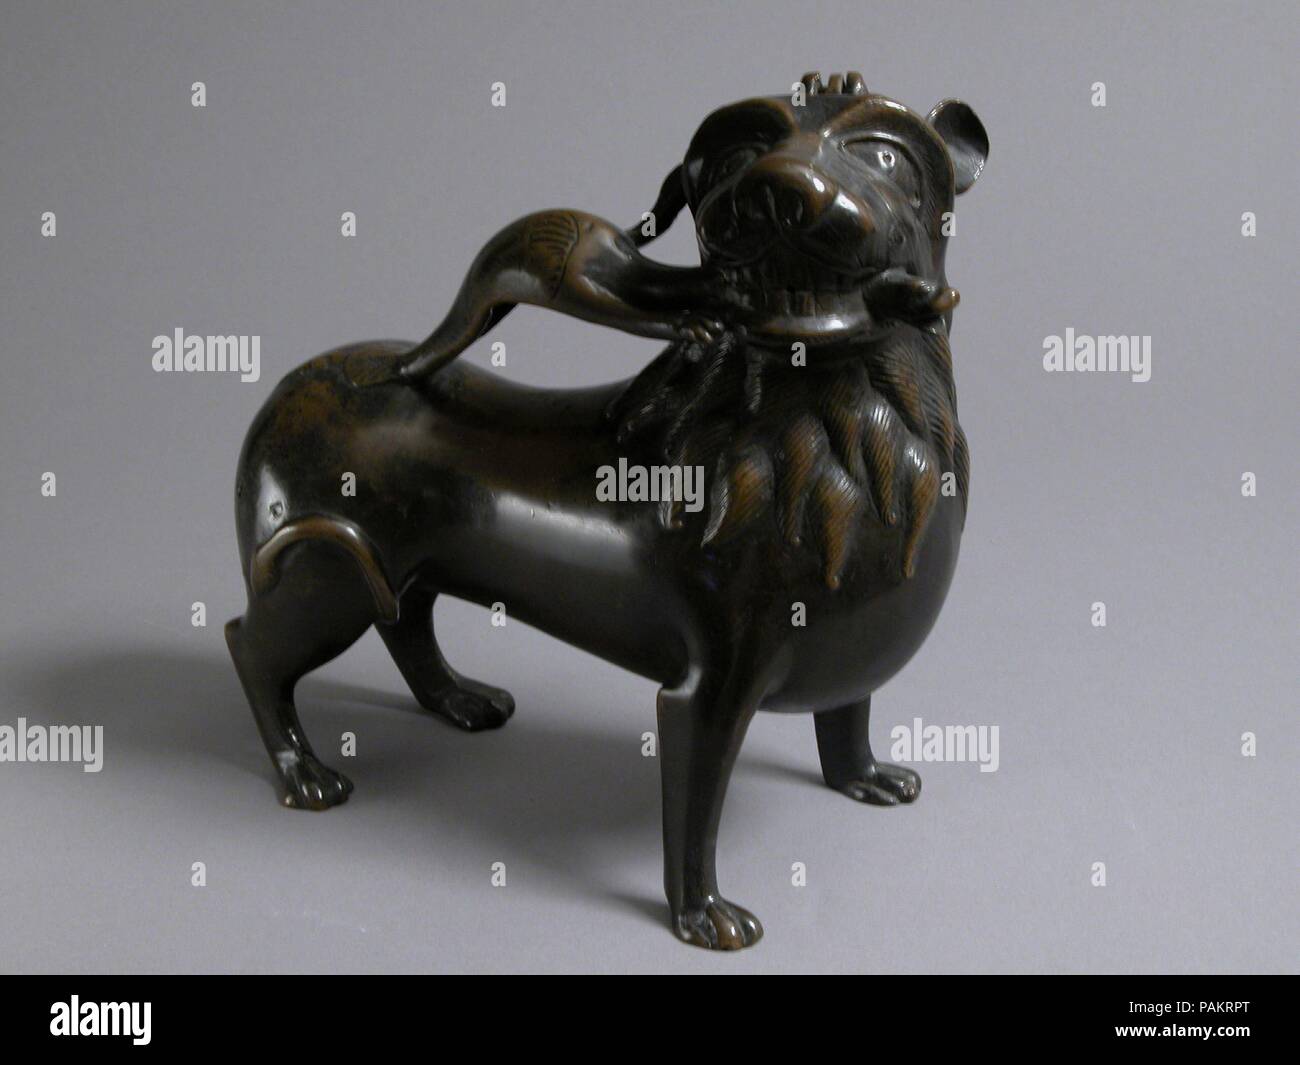 Aquamanile in the Form of a Lion. Culture: North German. Dimensions: Overall: 9 1/8 x 8 15/16 x 3 3/4 in. (23.2 x 22.7 x 9.5 cm)  Thickness PD: 3/50-1/10 in. (0.15-0.25 cm)  Weight PD: 84.3oz. (2391g). Date: ca. 1200.  This aquamanile is distinguished by the lion's turned head, which grasps the neck of the dragon in its jaws. The dragon here serves as both handle and spout. Museum: Metropolitan Museum of Art, New York, USA. Stock Photo